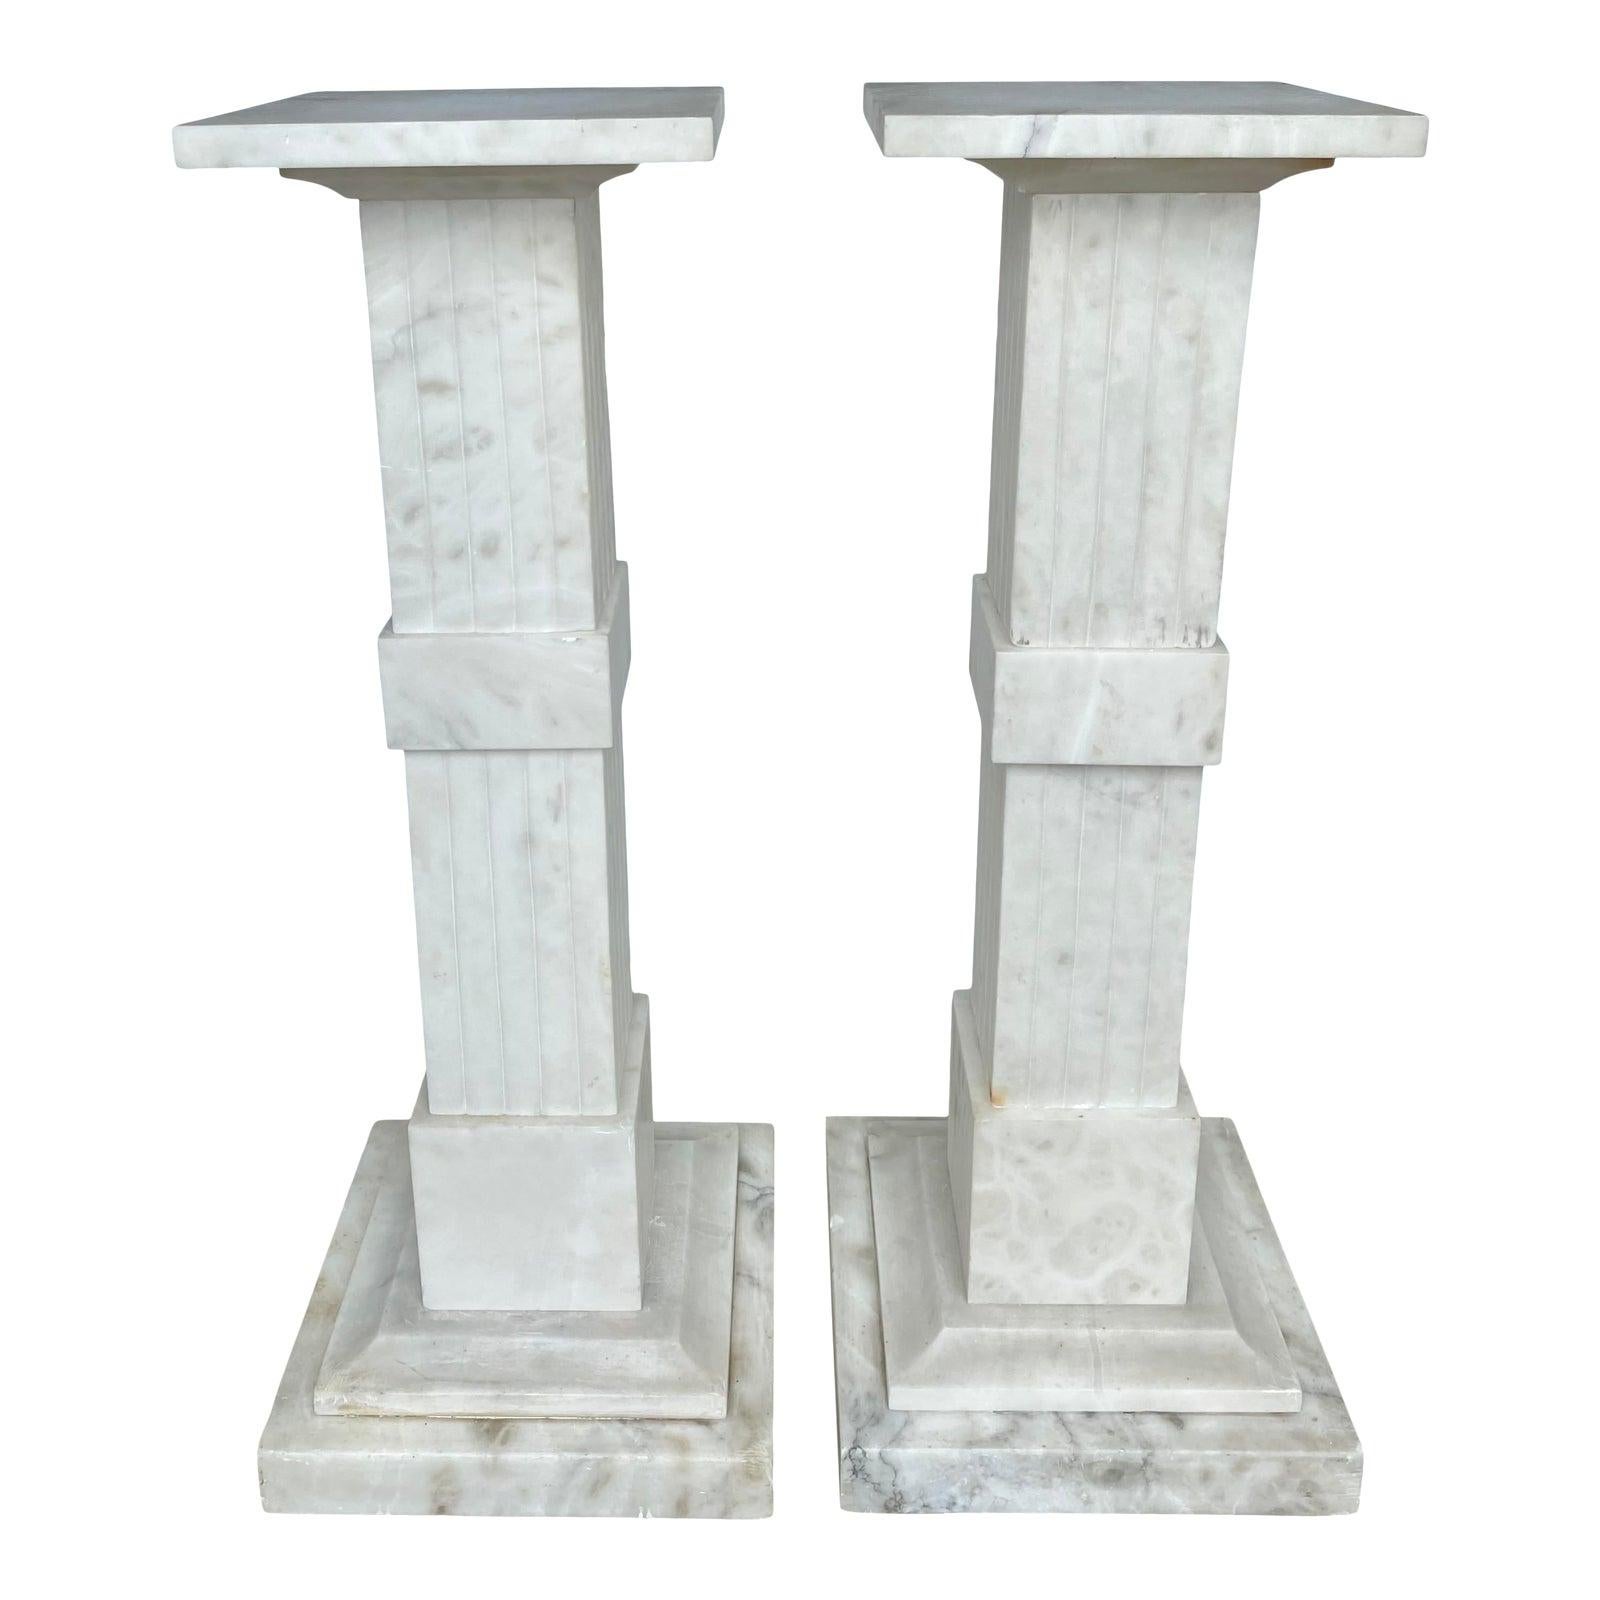 Impressive pair of neoclassical style white veined onyx stone pedestal columns. These large square columnar marble sculpture or plant stands feature square columns with fluted and band details atop stacked plinth bases. Each column is constructed of